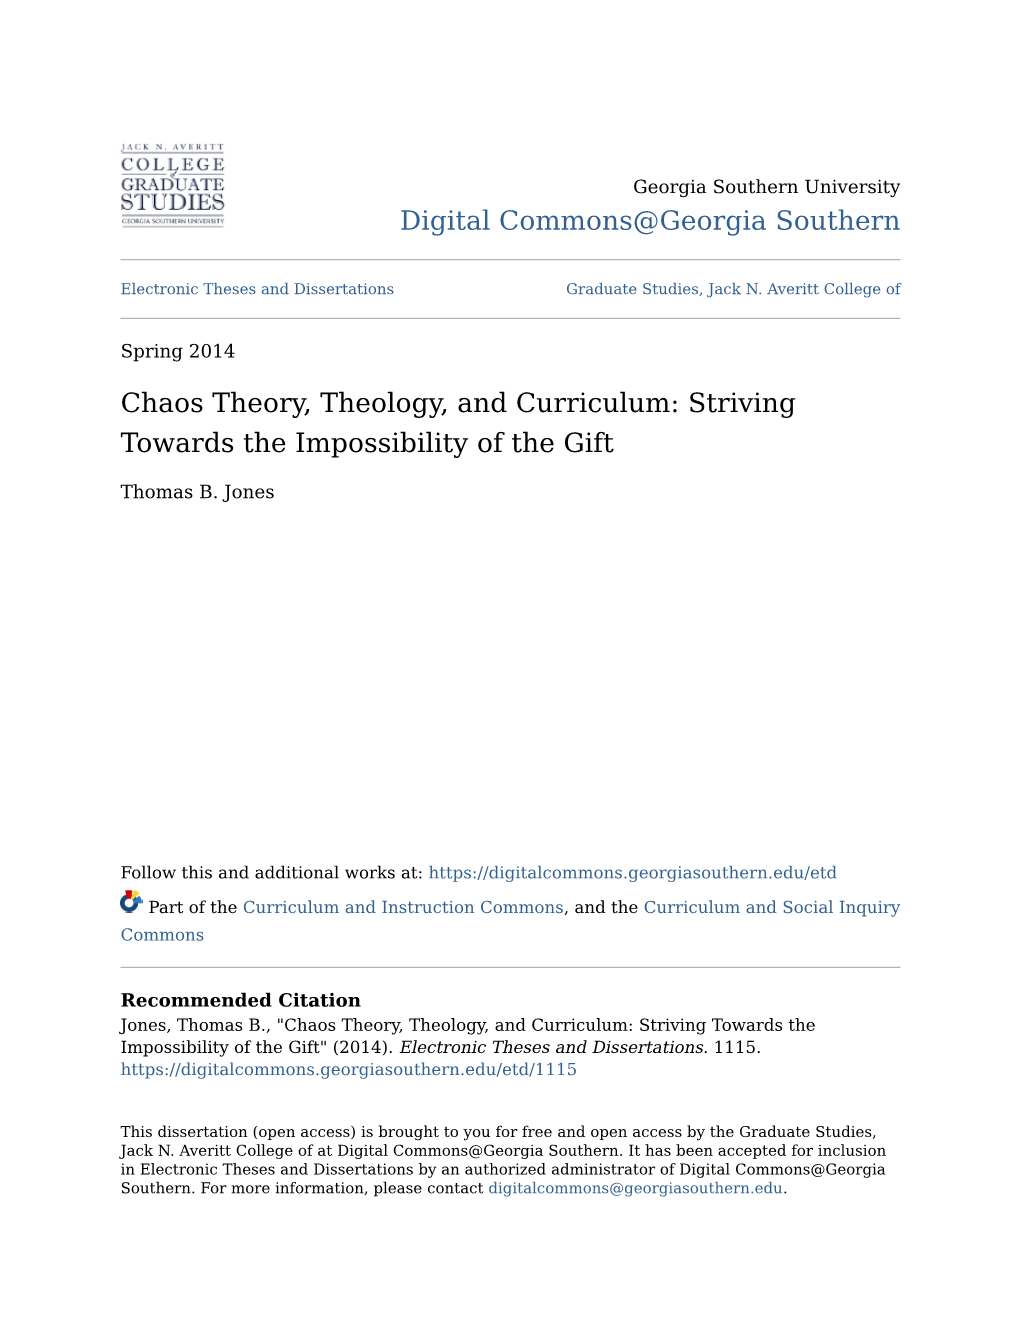 Chaos Theory, Theology, and Curriculum: Striving Towards the Impossibility of the Gift